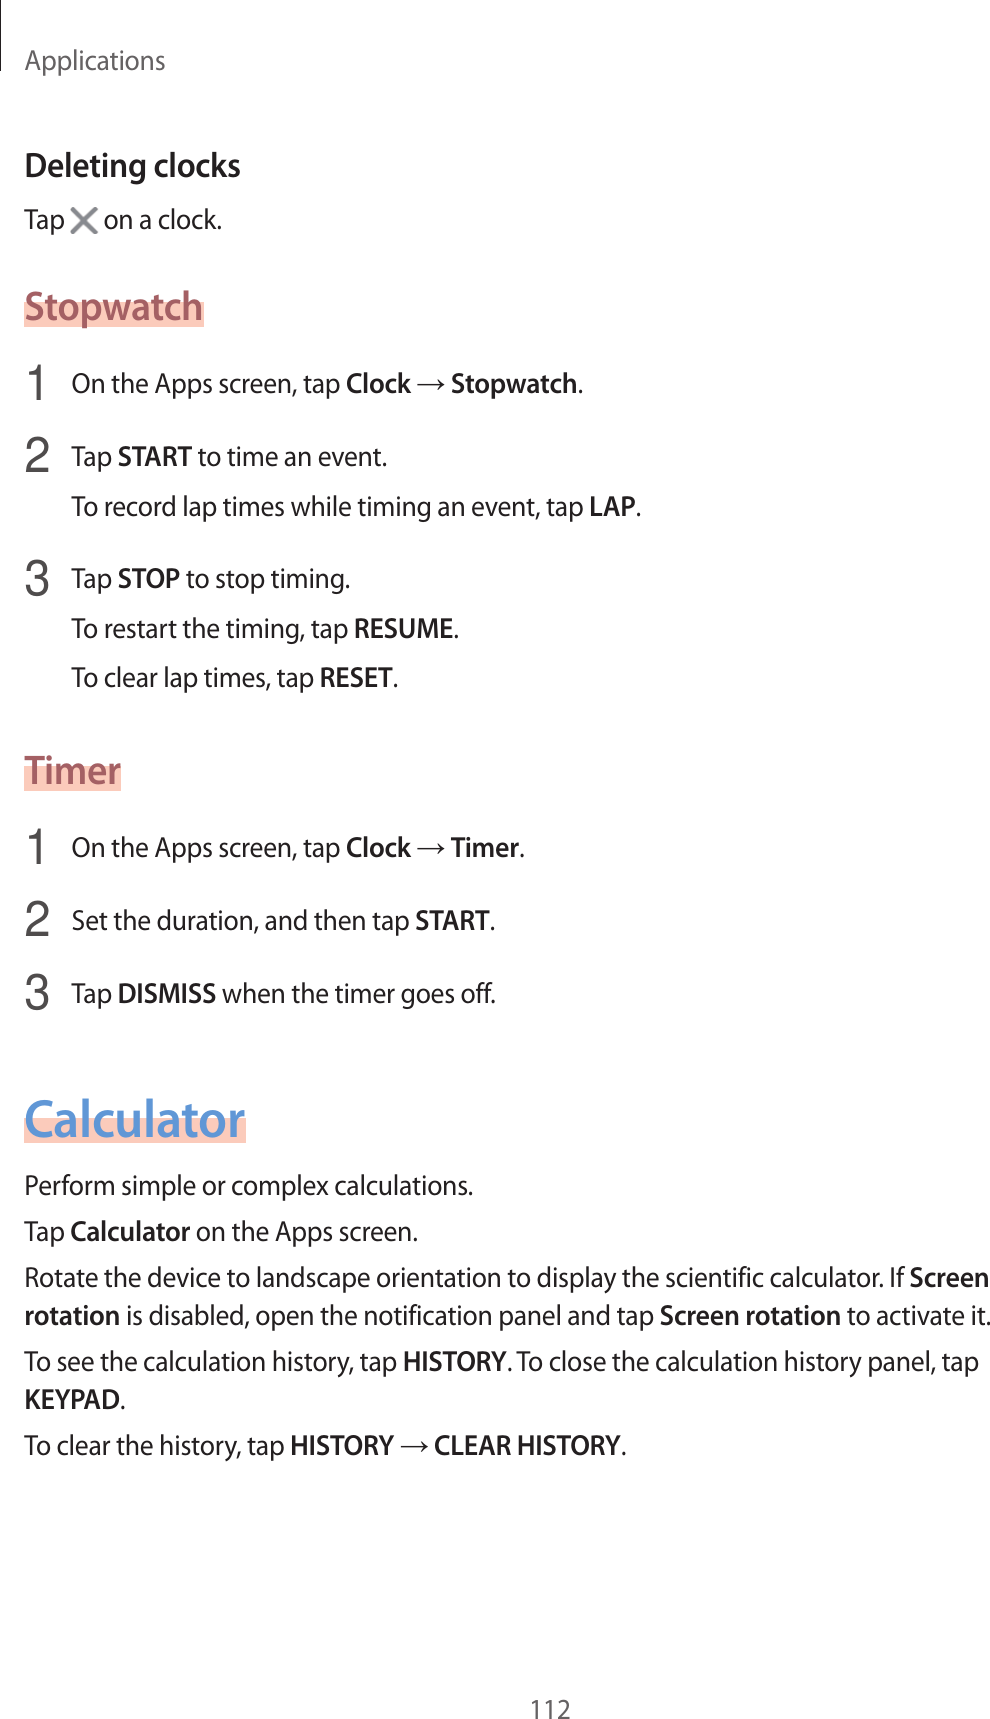 Applications112Deleting clocksTap   on a clock.Stopwatch1  On the Apps screen, tap Clock  Stopwatch.2  Tap START to time an even t.To recor d lap times while timing an ev en t, tap LAP.3  Tap STOP to stop timing .To restart the timing, tap RESUME.To clear lap times, tap RESET.Timer1  On the Apps screen, tap Clock  Timer.2  Set the duration, and then tap START.3  Tap DISMISS when the timer goes off.CalculatorP erform simple or complex calculations .Tap Calculator on the Apps screen.Rotate the device t o landscape orientation t o display the scien tific calculat or. If Screen rotation is disabled, open the notification panel and tap Screen rota tion to activate it.To see the calculation history , tap HISTORY. To close the calculation history panel, tap KEYPAD.To clear the history, tap HISTORY  CLEAR HISTORY.